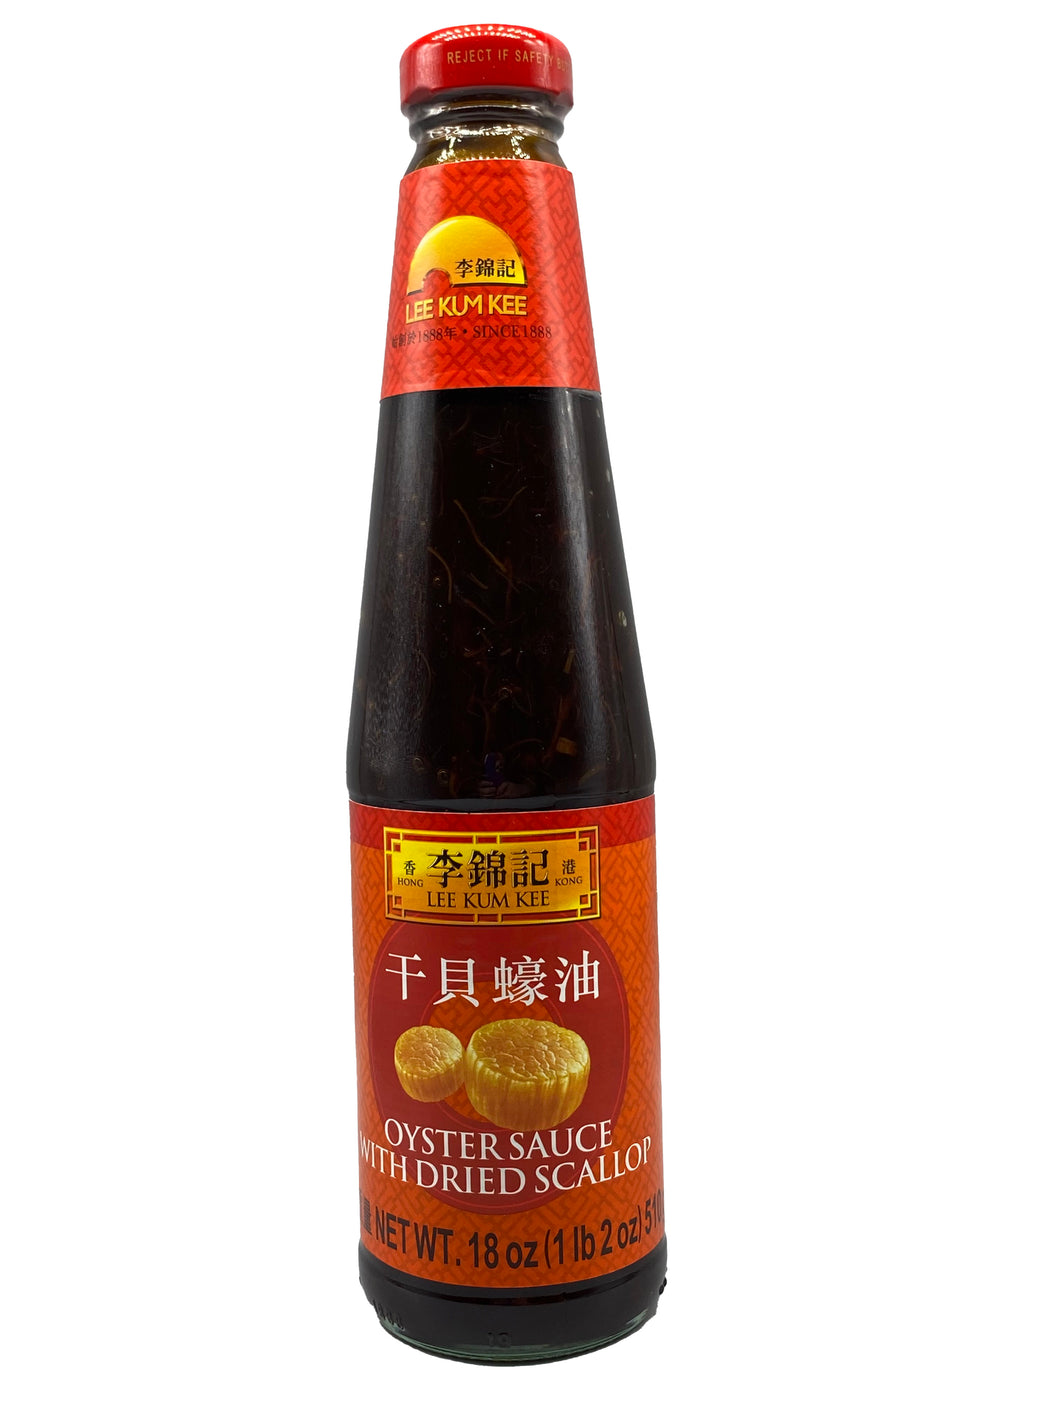 Lee Kum Kee Oyster Sauce with Dried Scallop